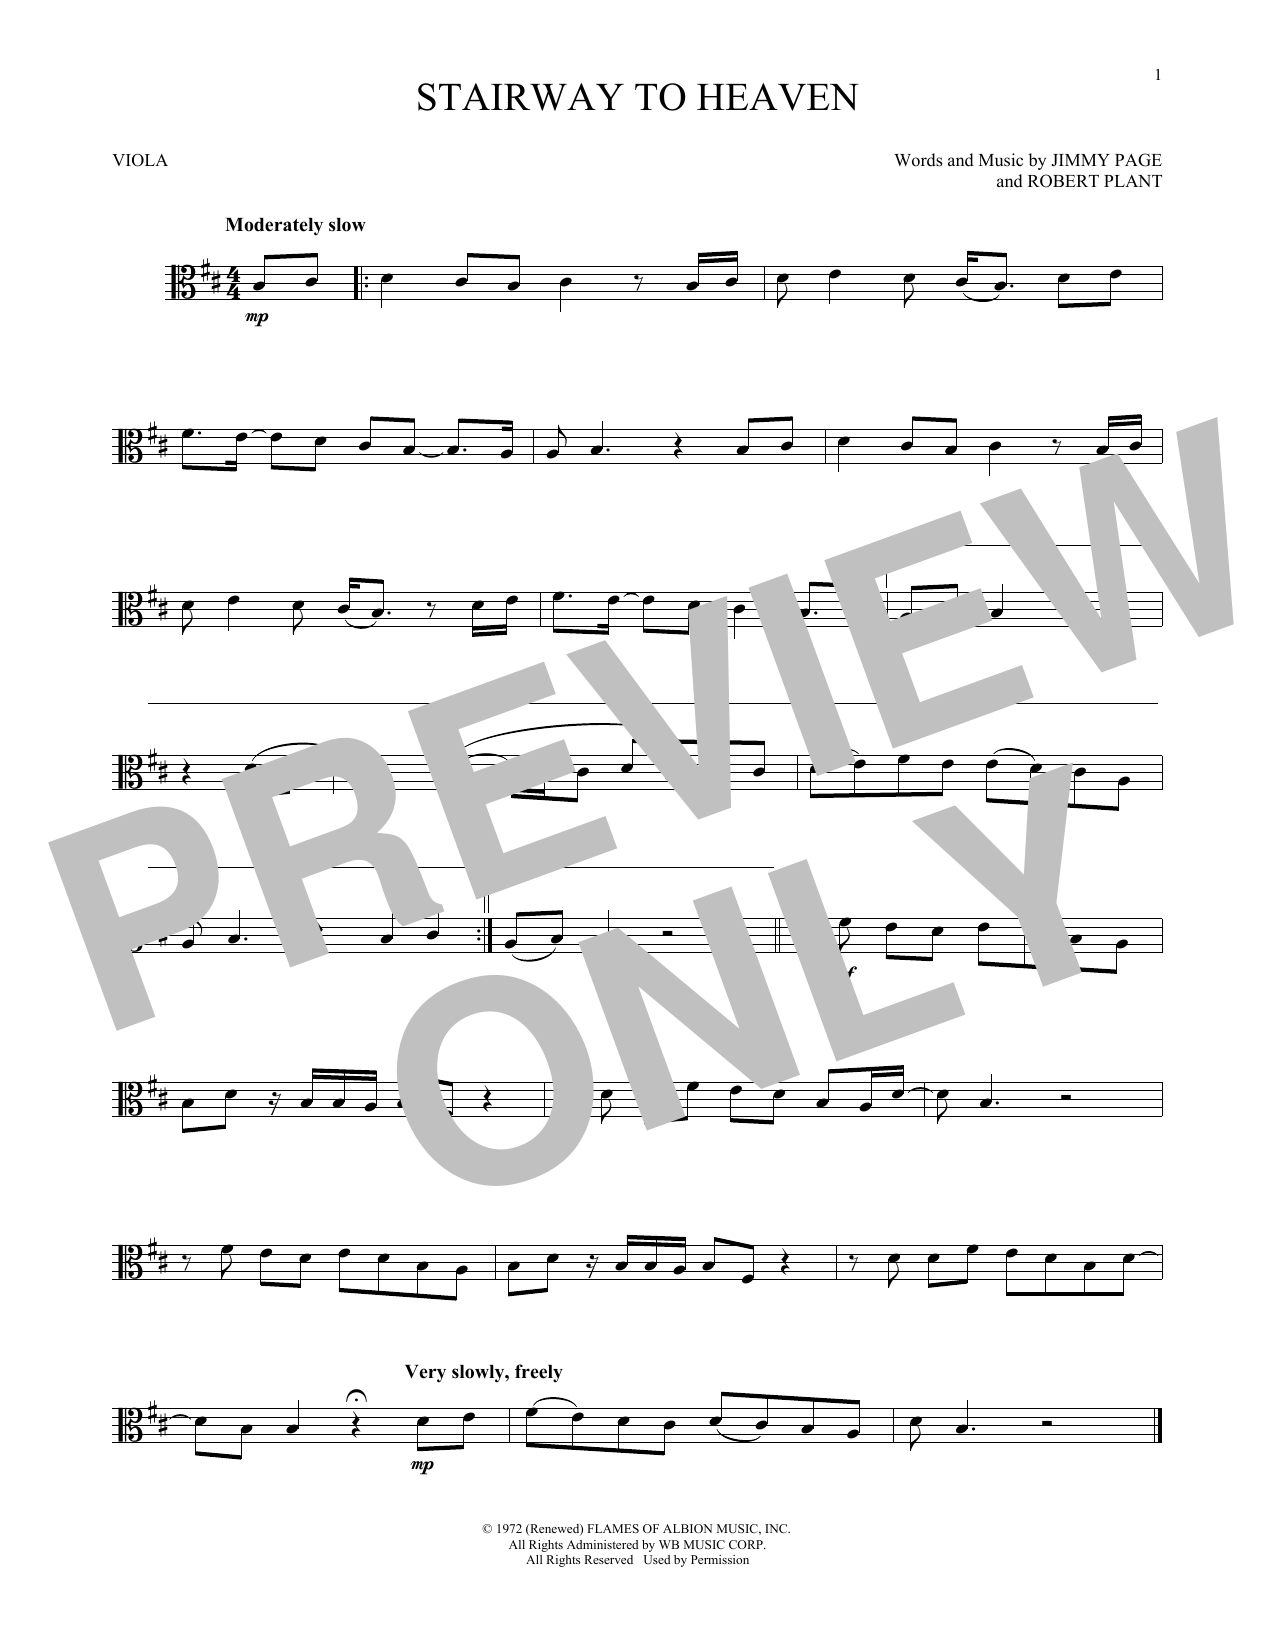 Download Led Zeppelin Stairway To Heaven Sheet Music